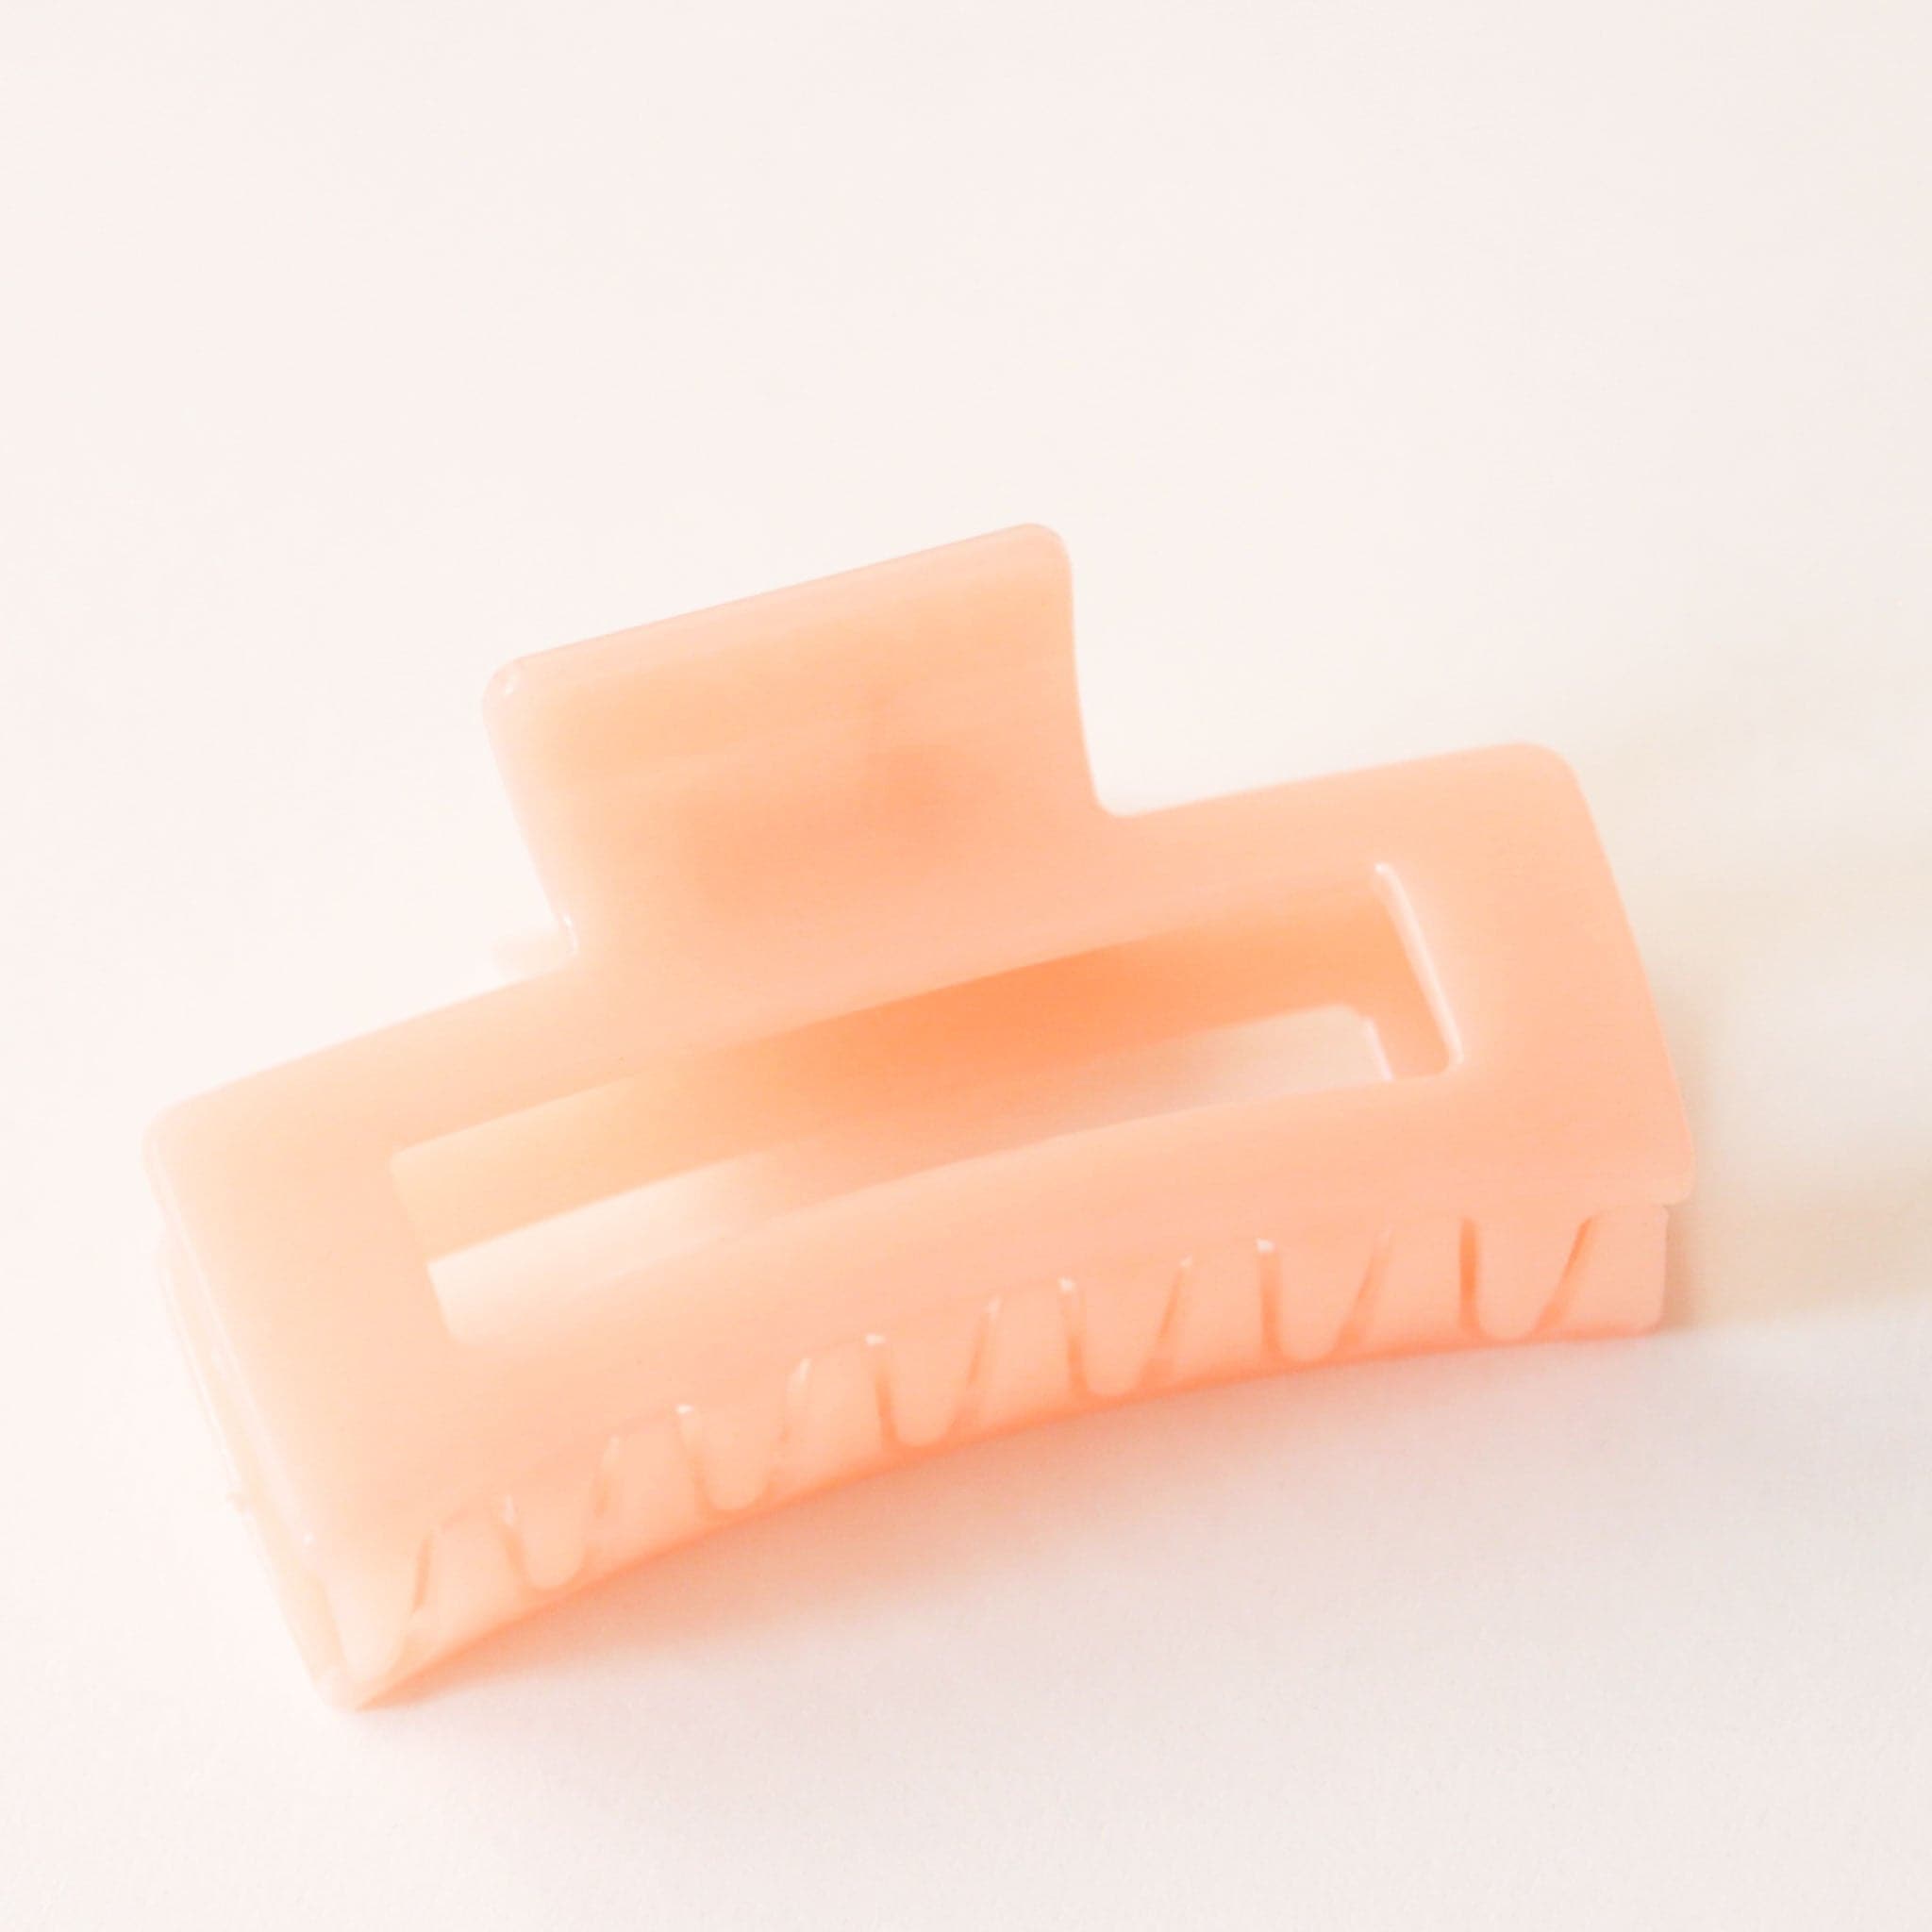 On a white background is a light orange colored rectangular claw clip with a jelly, almost translucent effect.